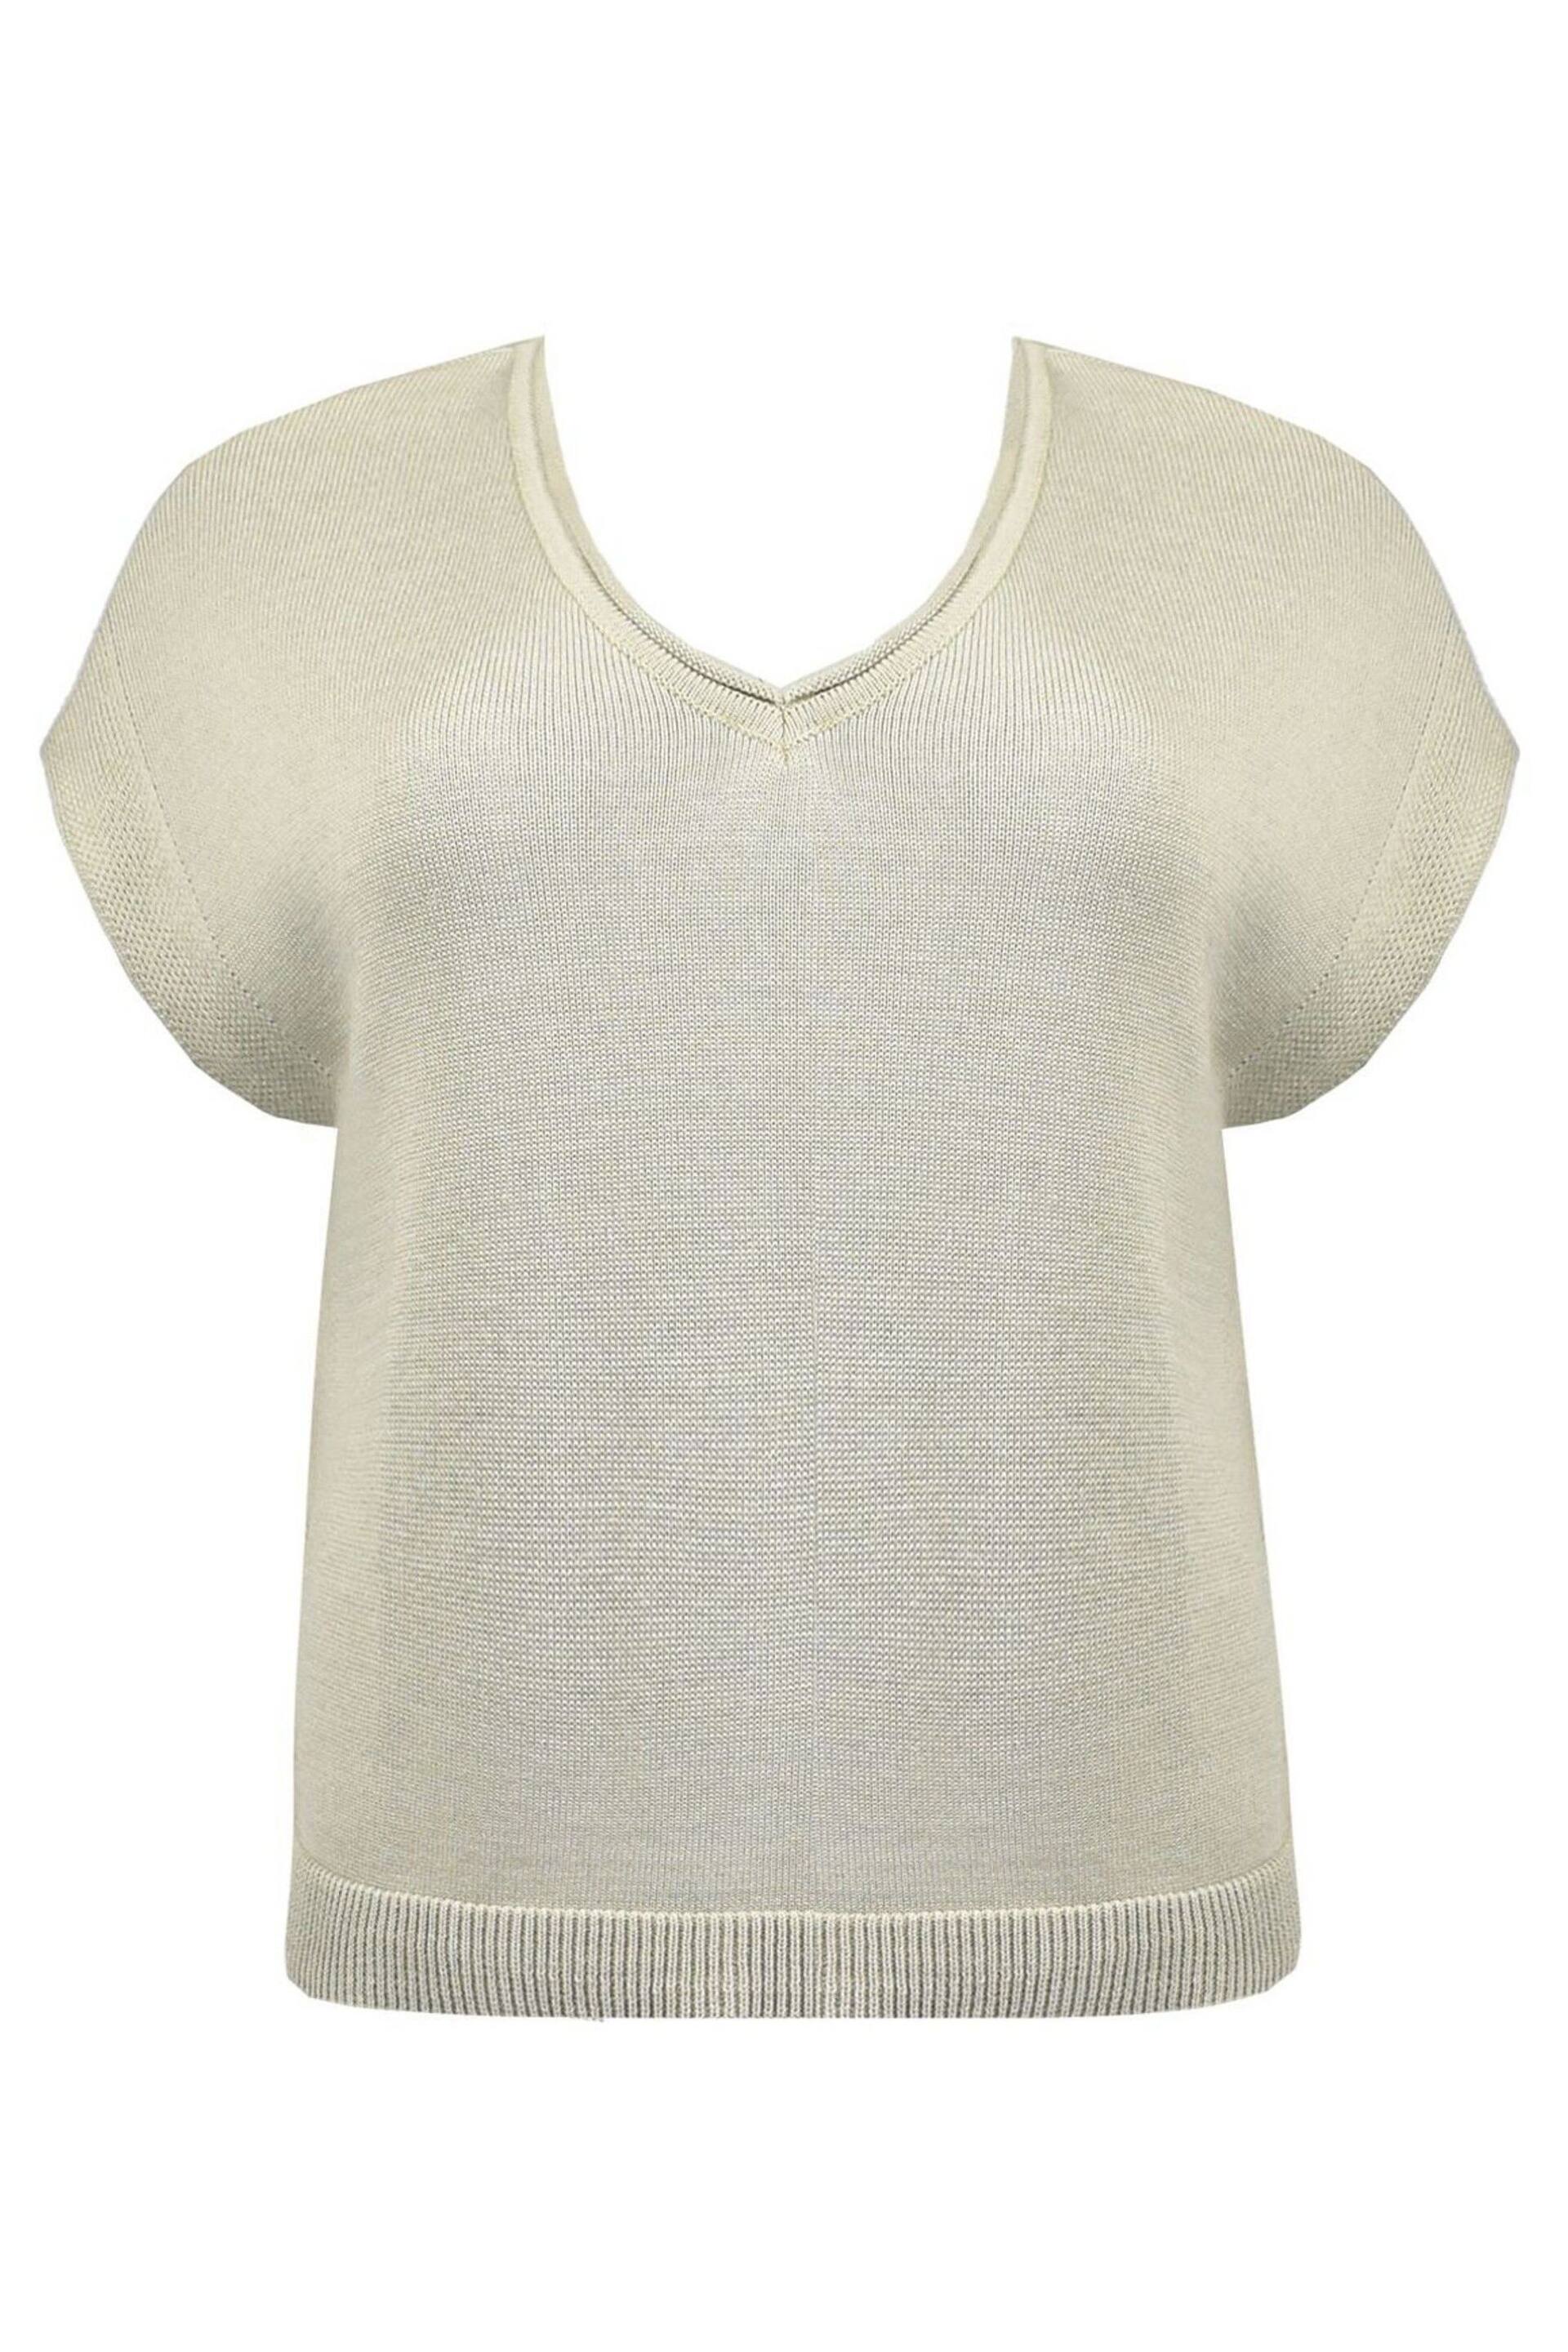 Live Unlimited Curve Natural knitted Cotton Vest - Image 6 of 6